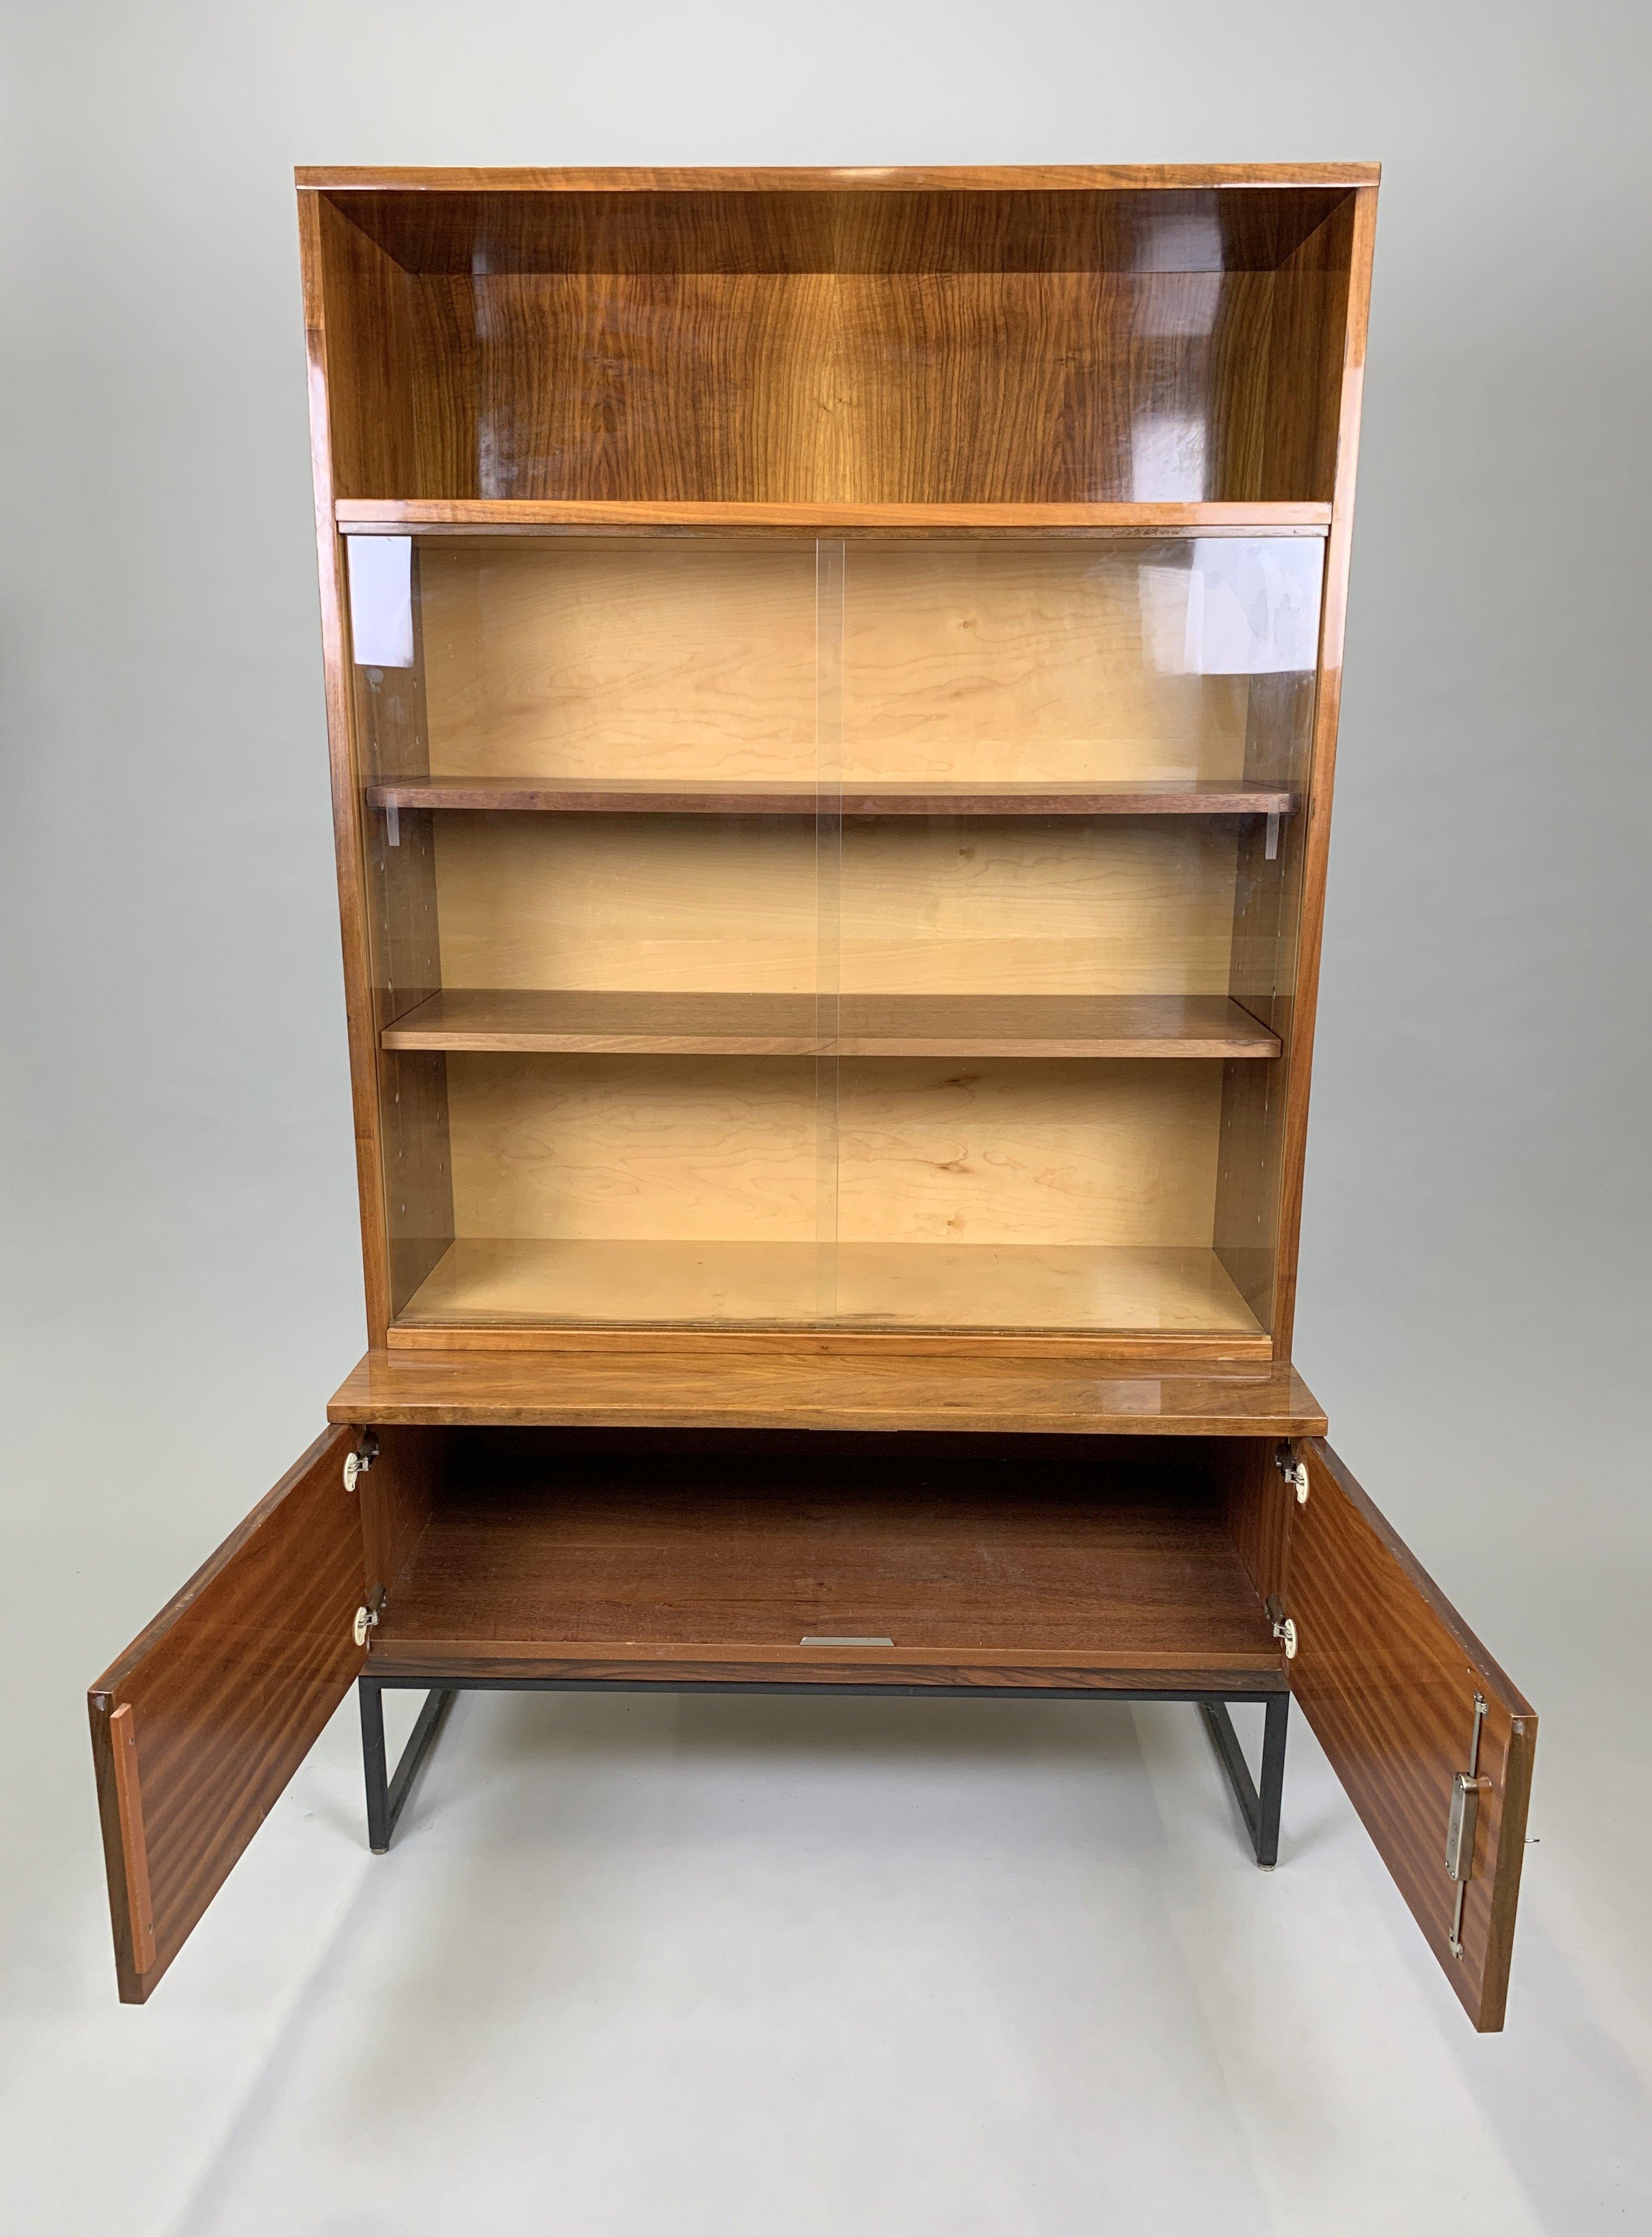 Vintage cabinet or bookcase with shelves, glass sliding doors and four drawers from 'Belmondo' collection made in high gloss. Made in Czechoslovakia by Novy Domov (marked) in the 1970s. Good original condition.